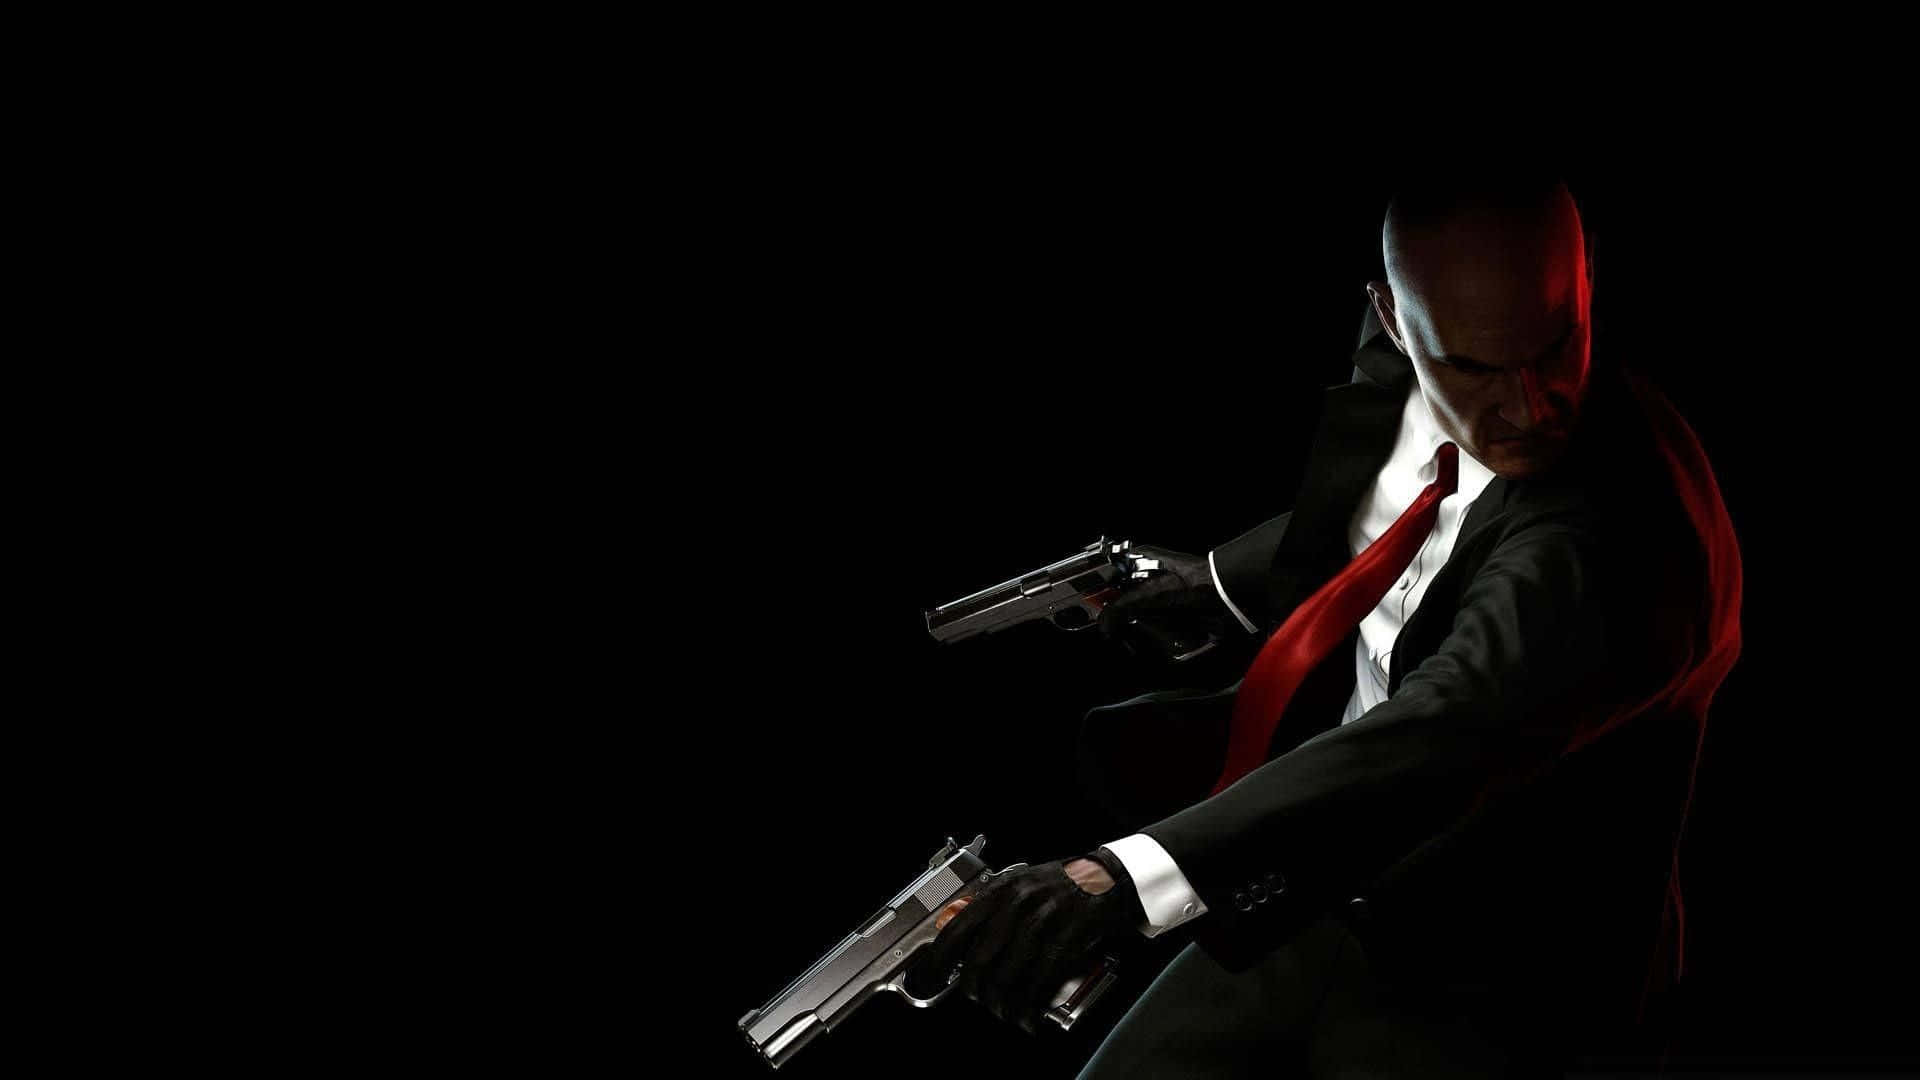 Agent47 In Aktion In Hitman: Absolution